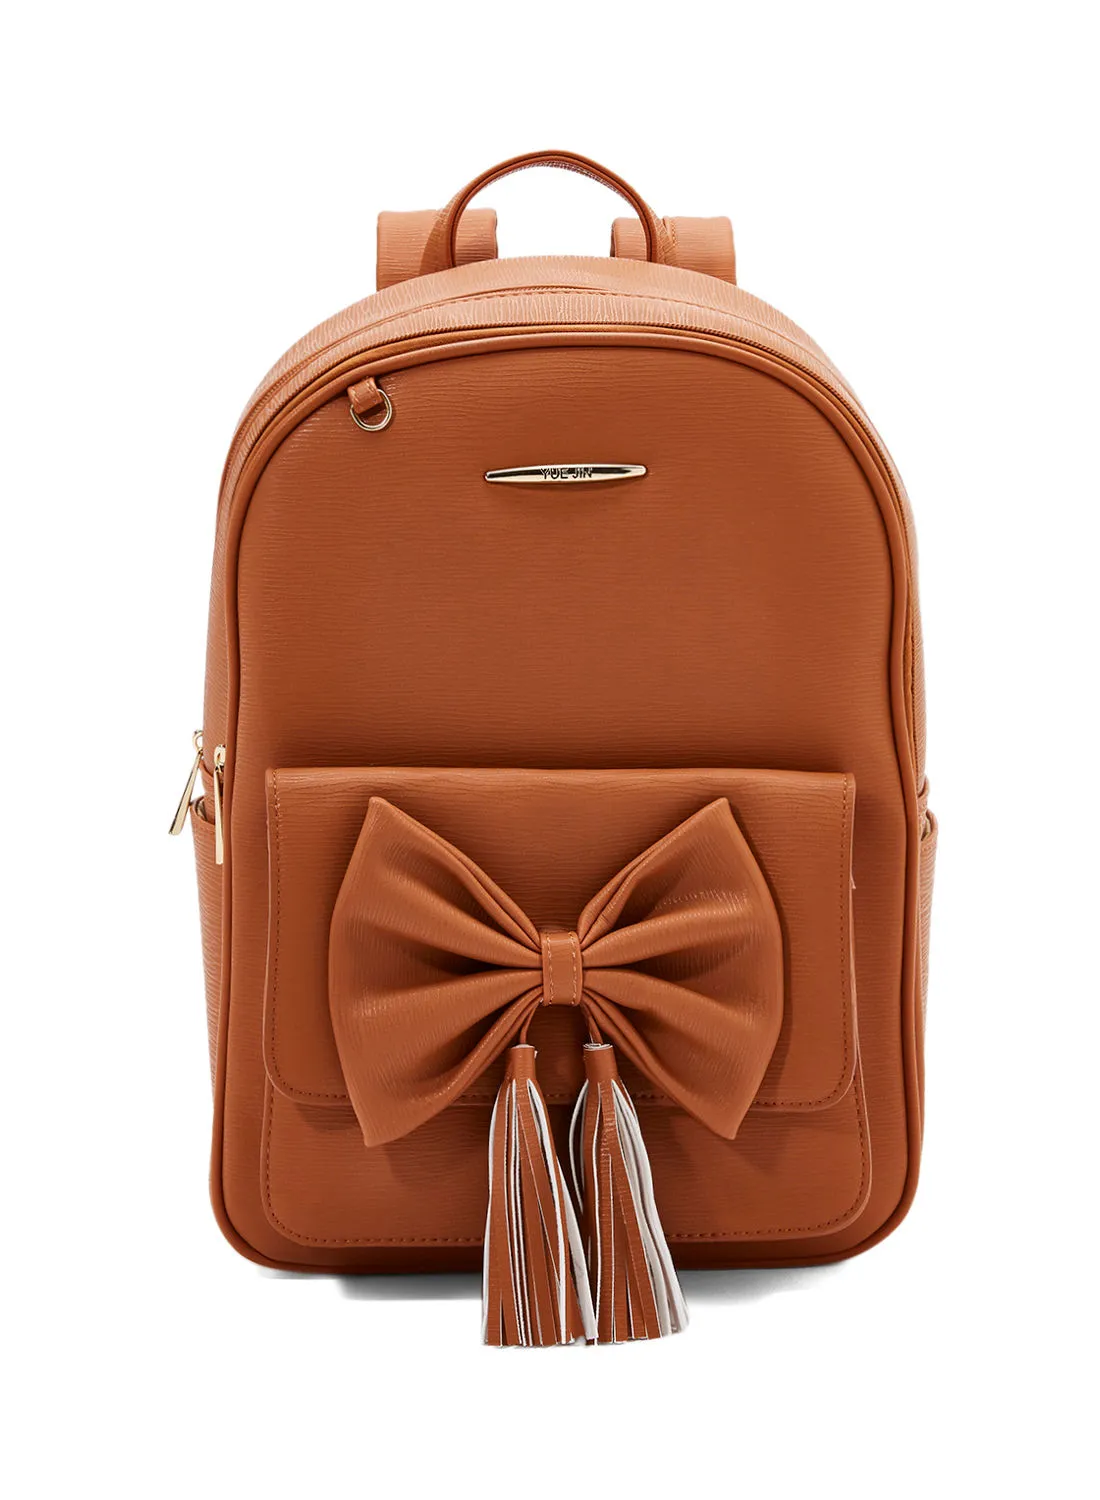 YUEJIN Faux Leather Backpack Brown